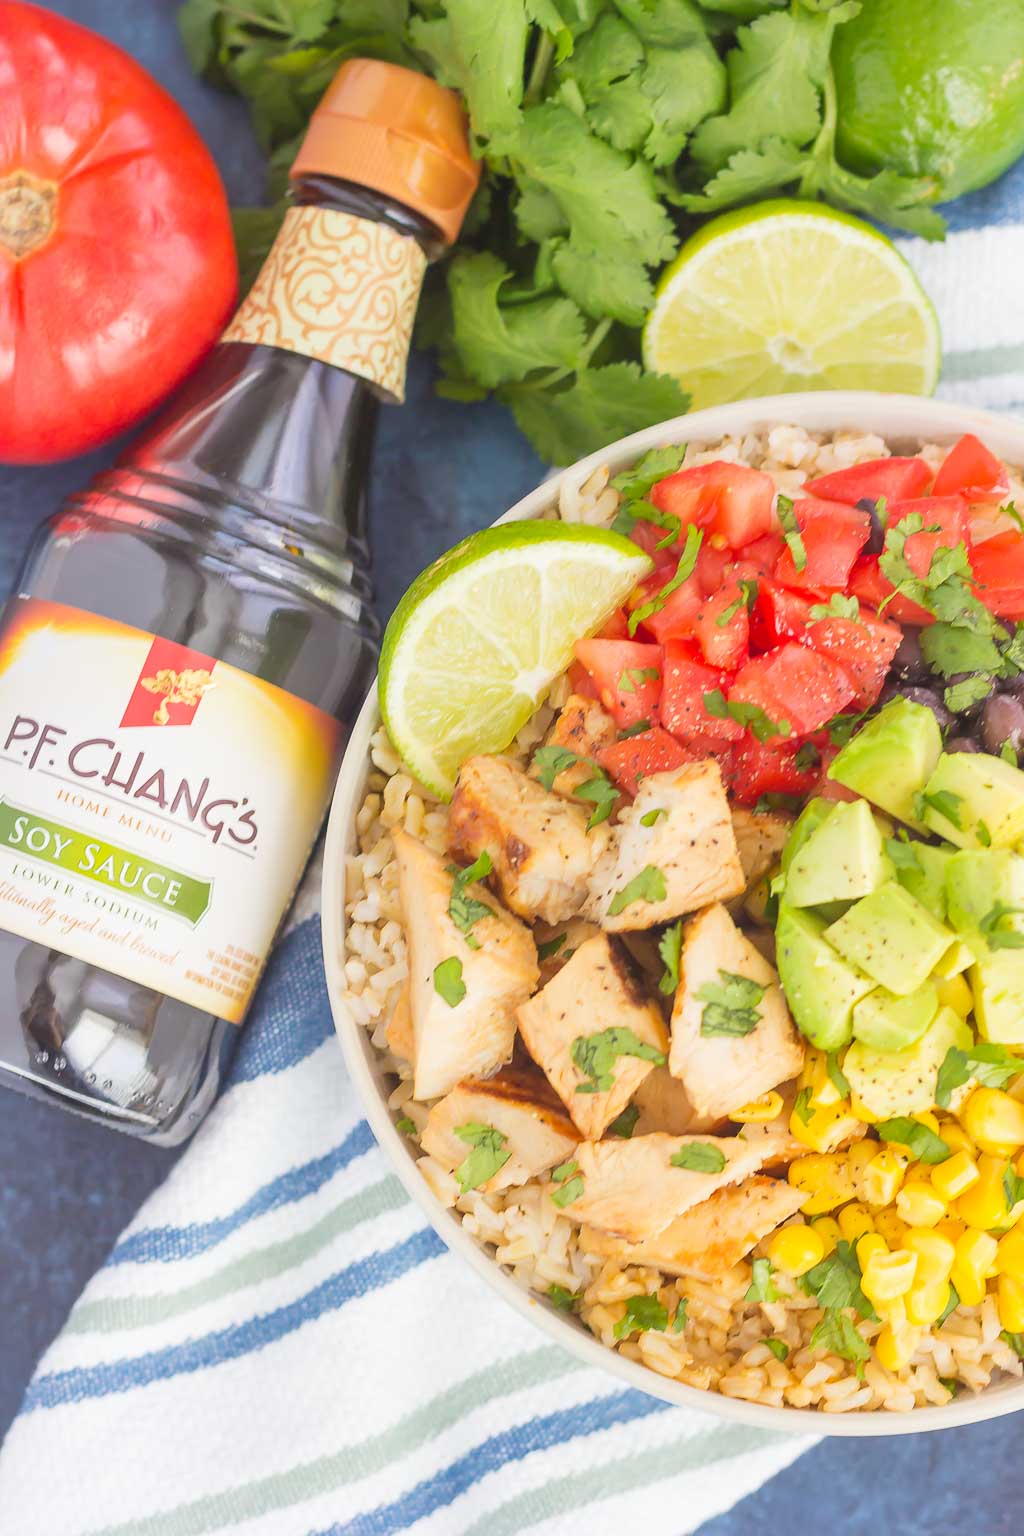 Skip the takeout and make your own Easy Chicken Burrito Bowl at home! It's loaded with juicy chicken, cilantro lime rice, black beans, corn, fresh tomatoes, and avocado. Drizzled with a soy sauce marinade and ready in no time, this meal is sure to become a family favorite!